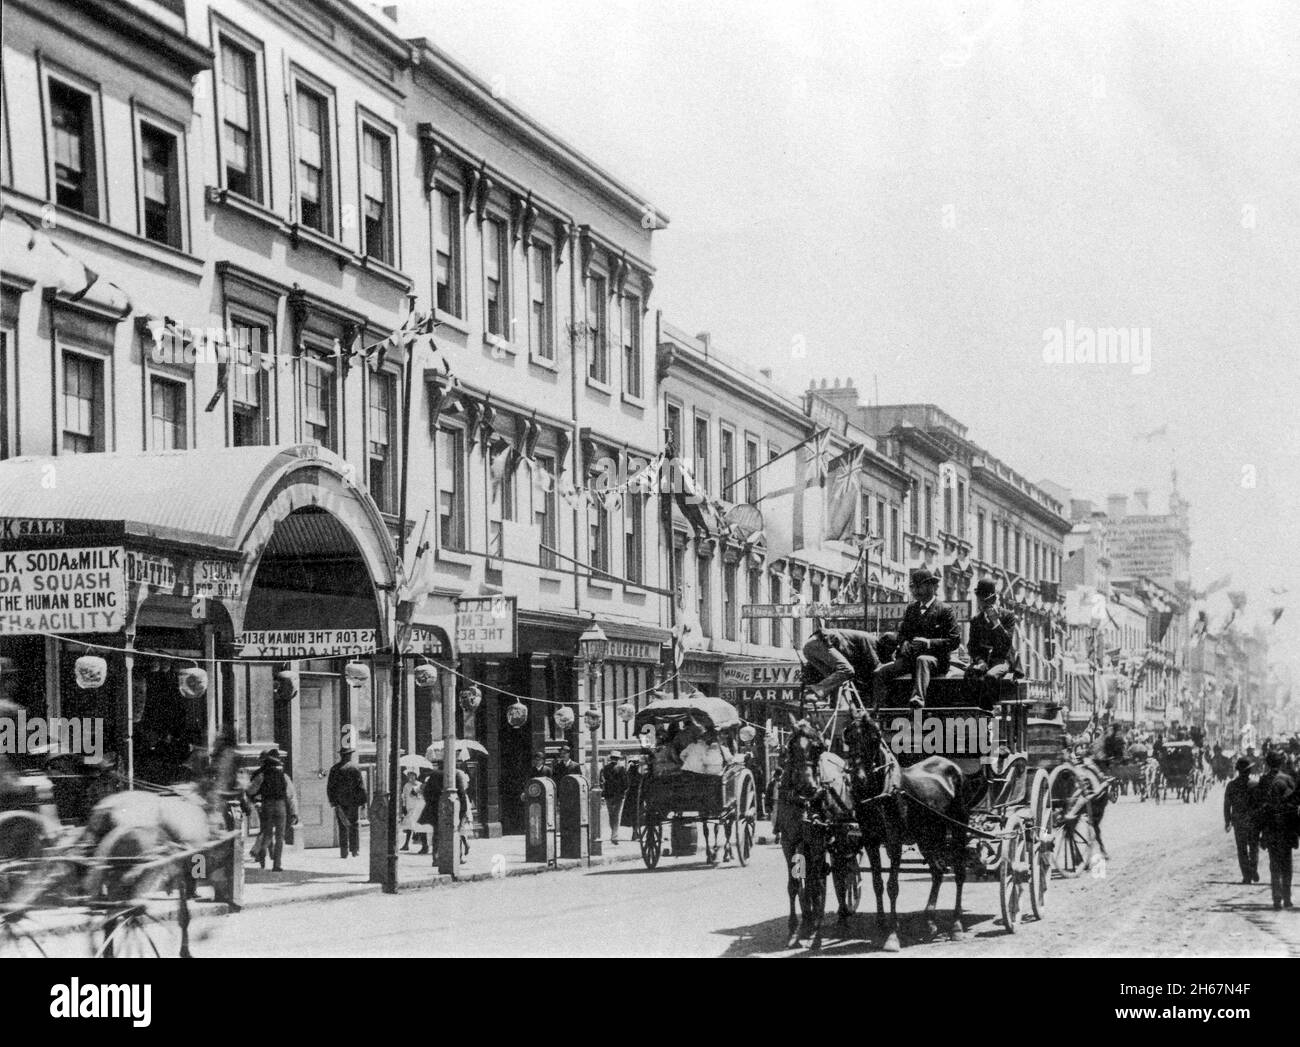 Historical Sydney in  1879 showing George street and the transport of the day the   horse and carriage. Stock Photo